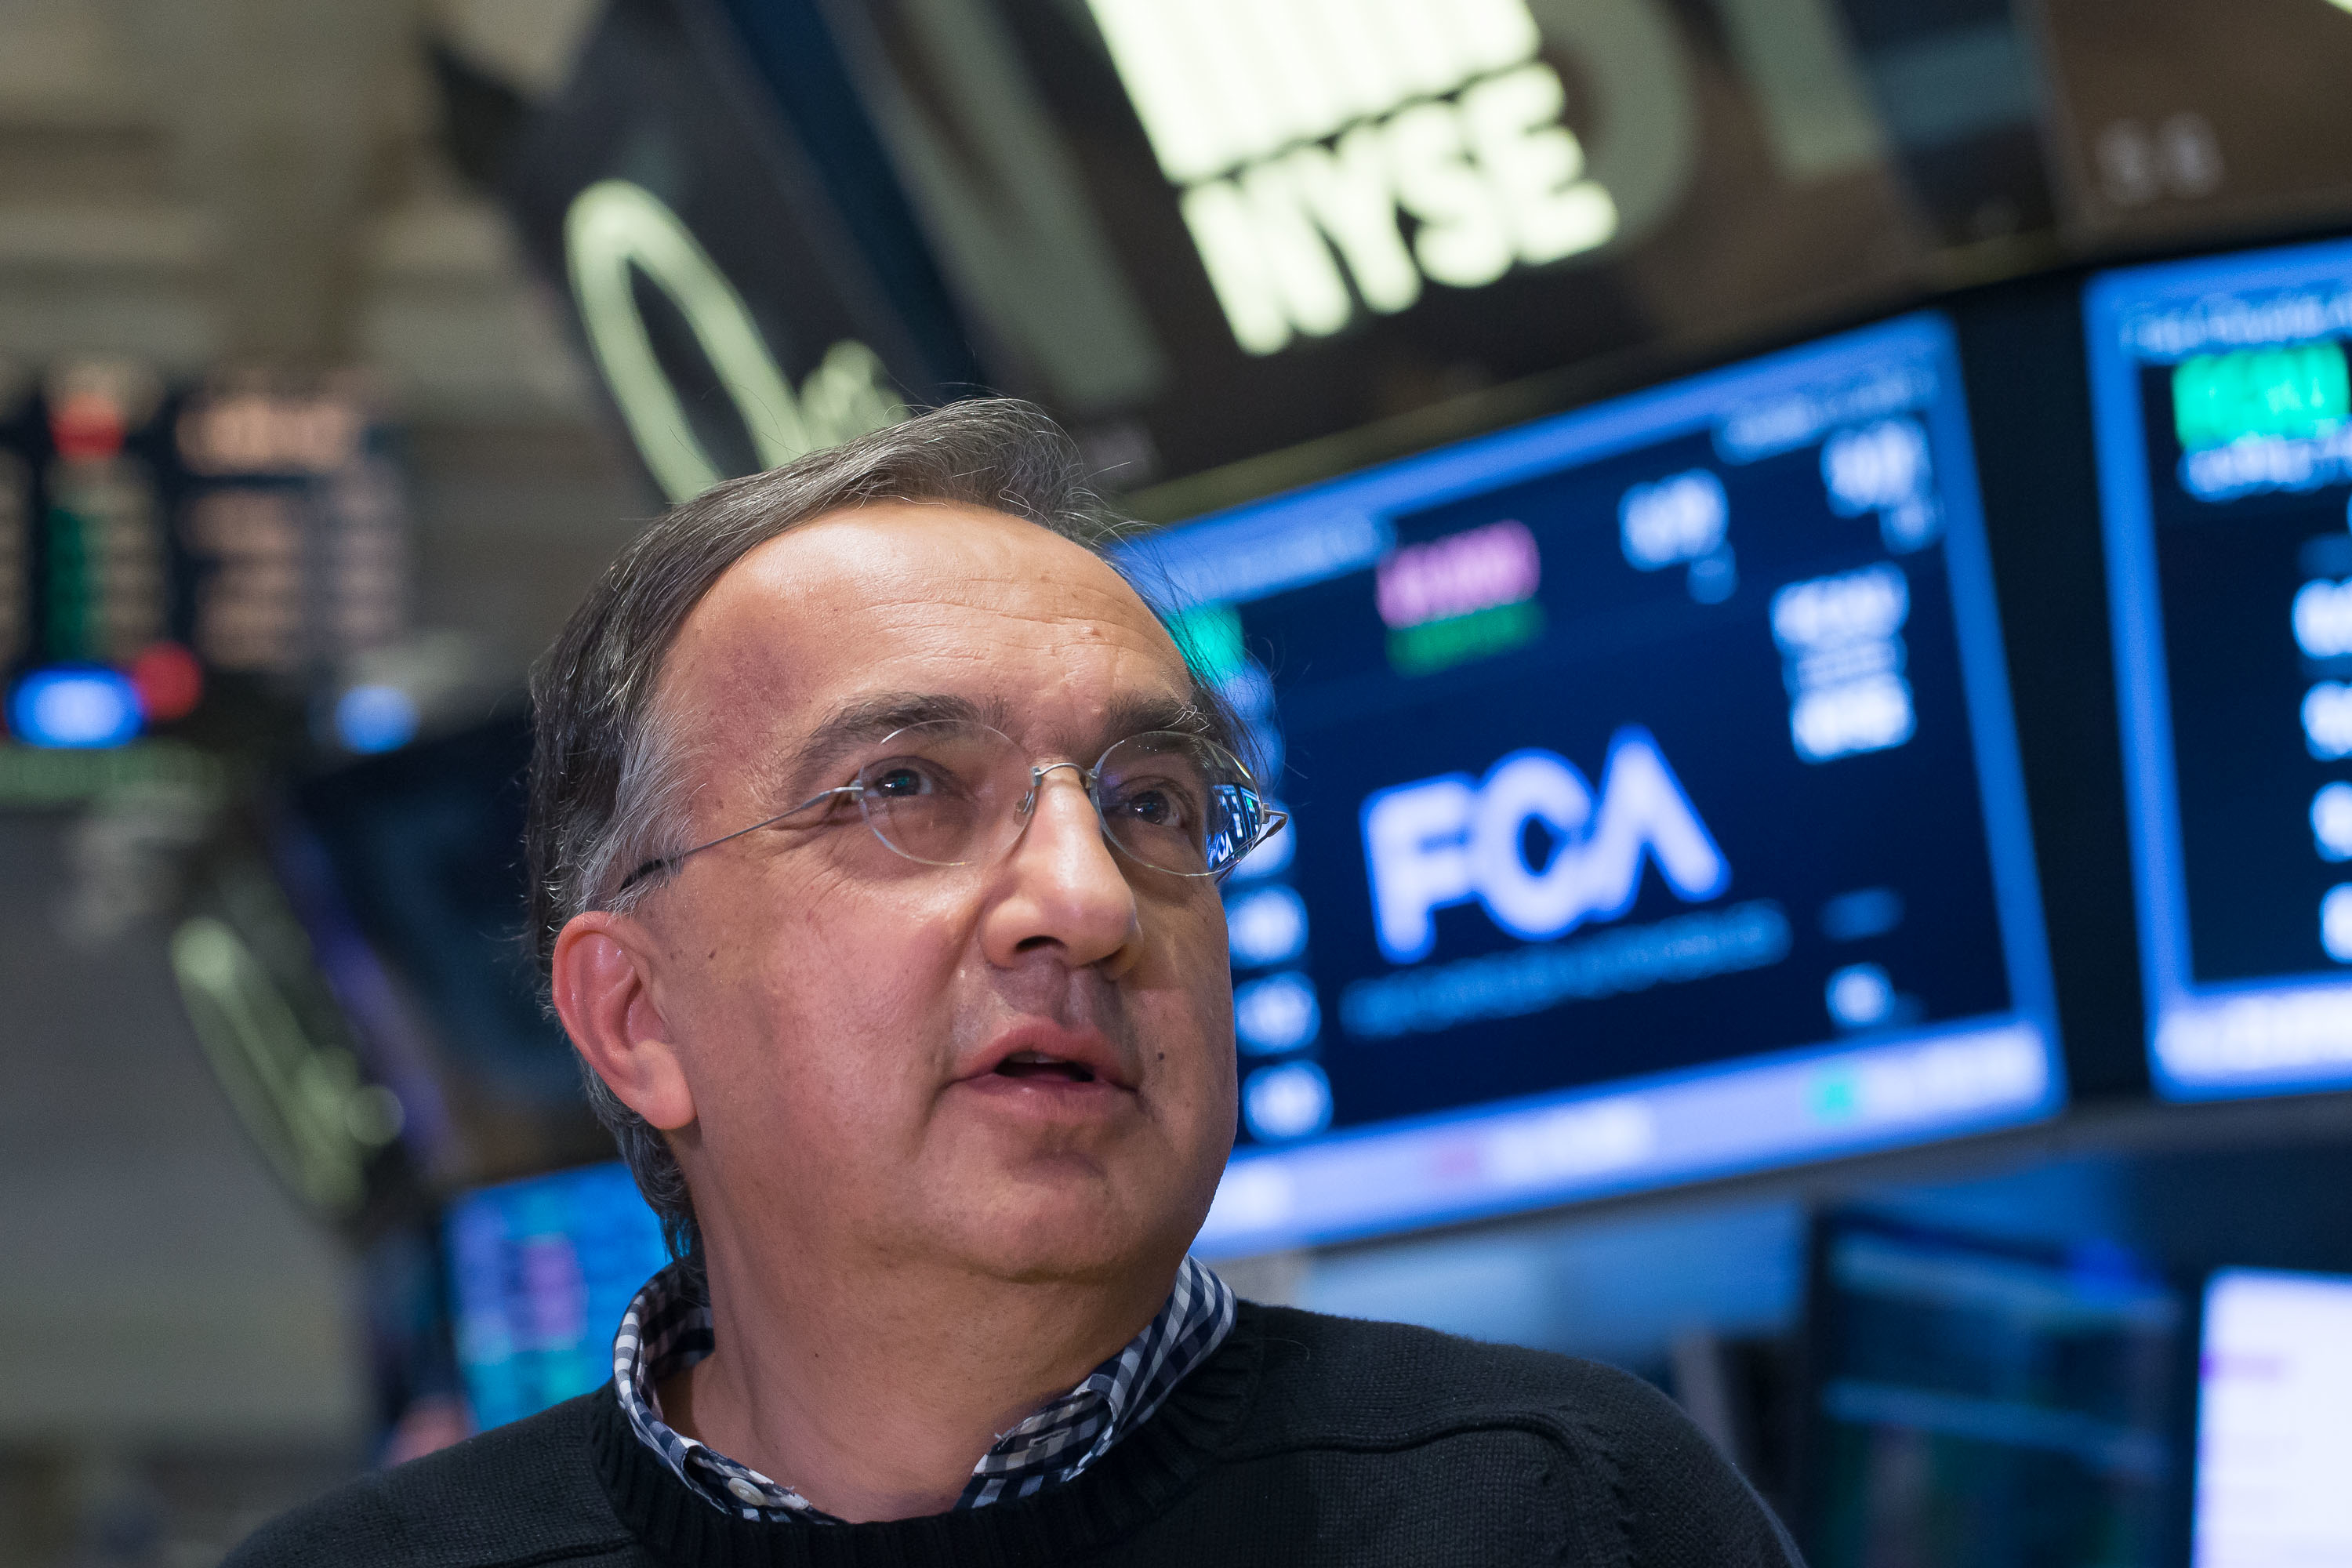 Former FCA Chairman Marchionne Dies at 66